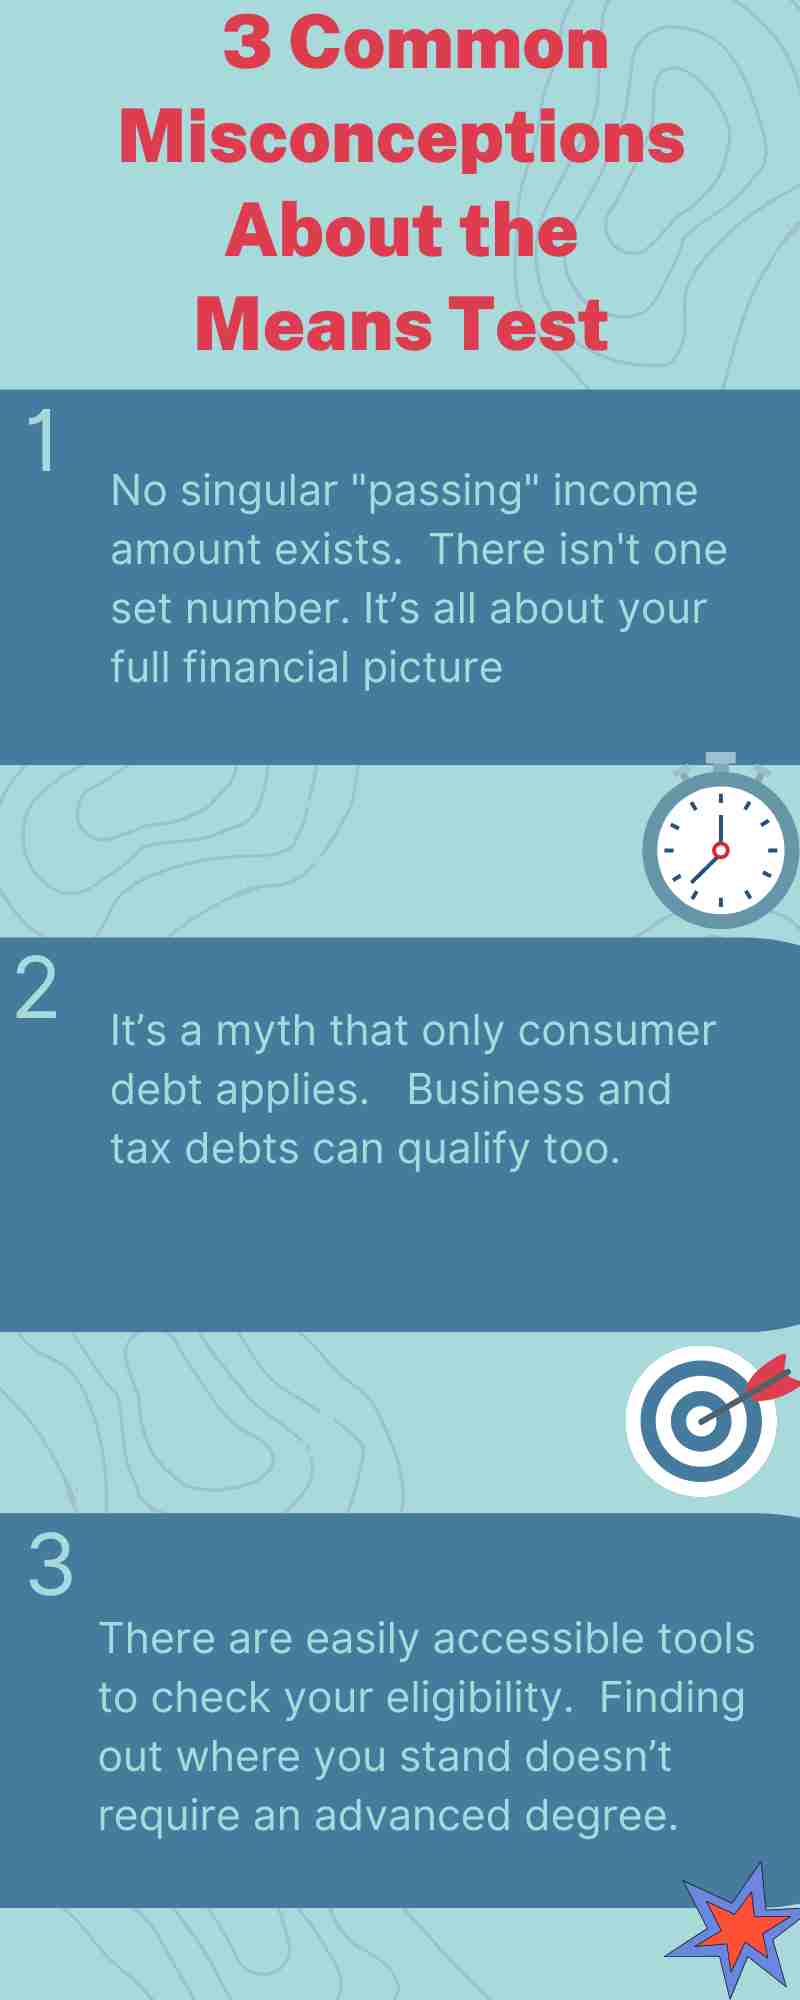 An infographic debunking three common misconceptions about taxes and the Chapter 7 bankruptcy means test calculator.